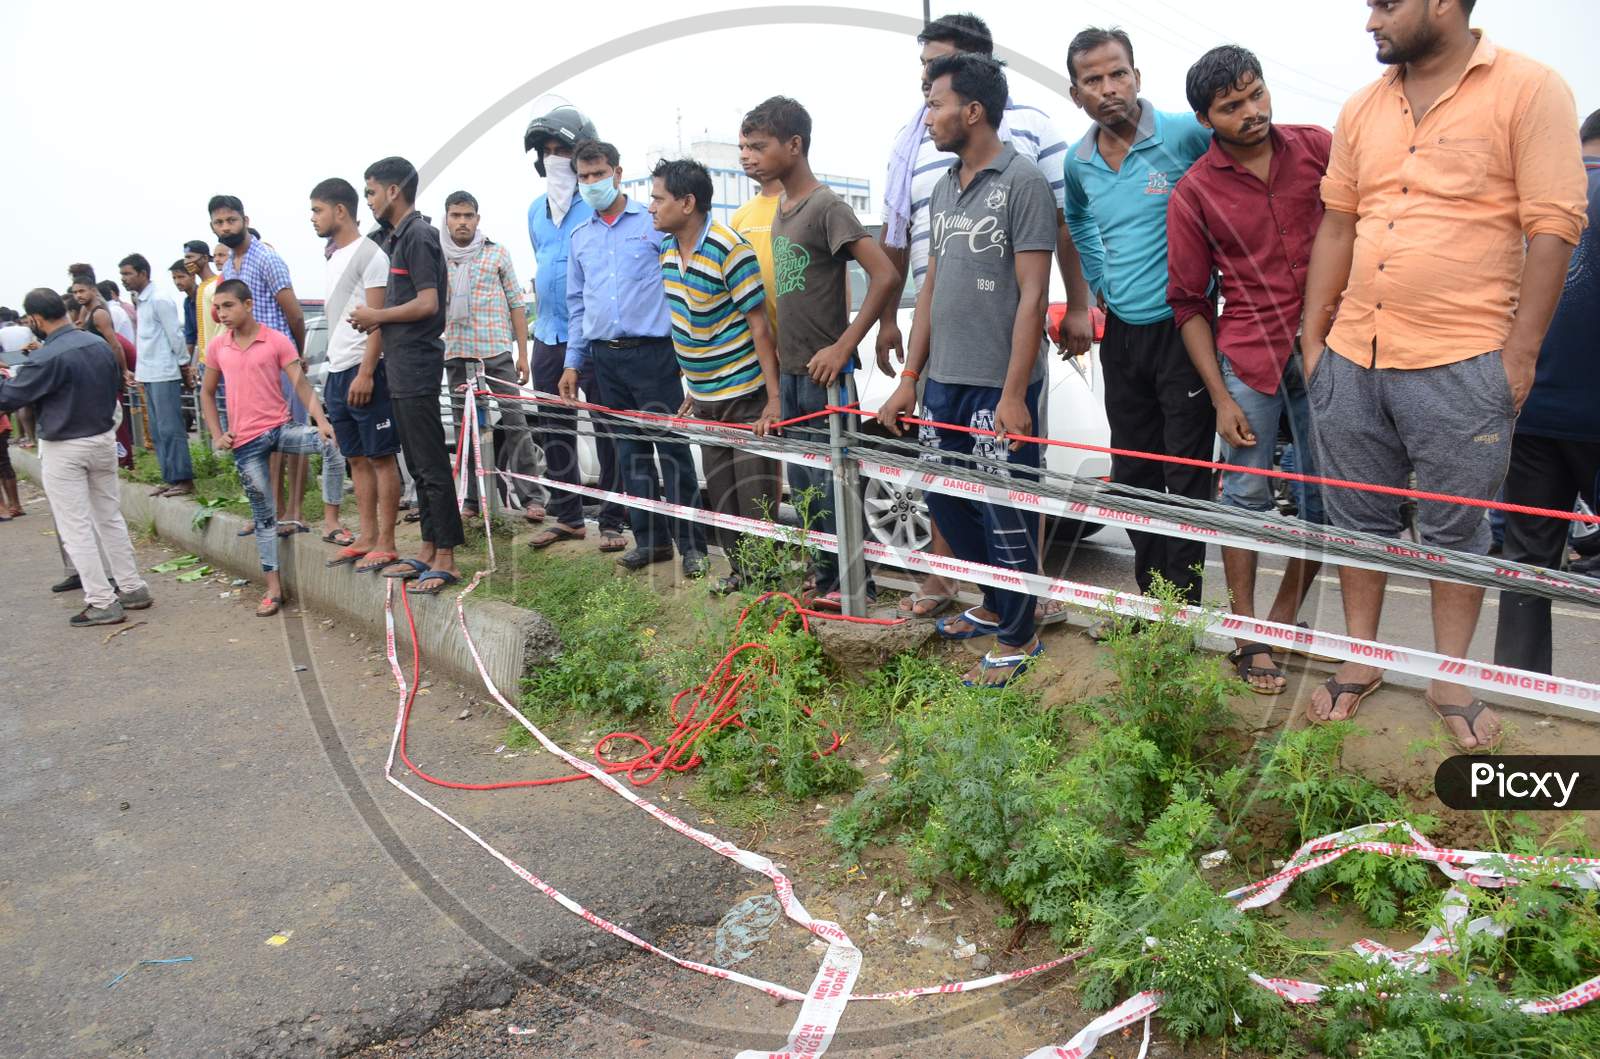 Bystanders at the site of the encounter where gangster Vikas Dubey who was killed when he tried to escape from police custody in Kanpur, Uttar Pradesh on July 10, 2020